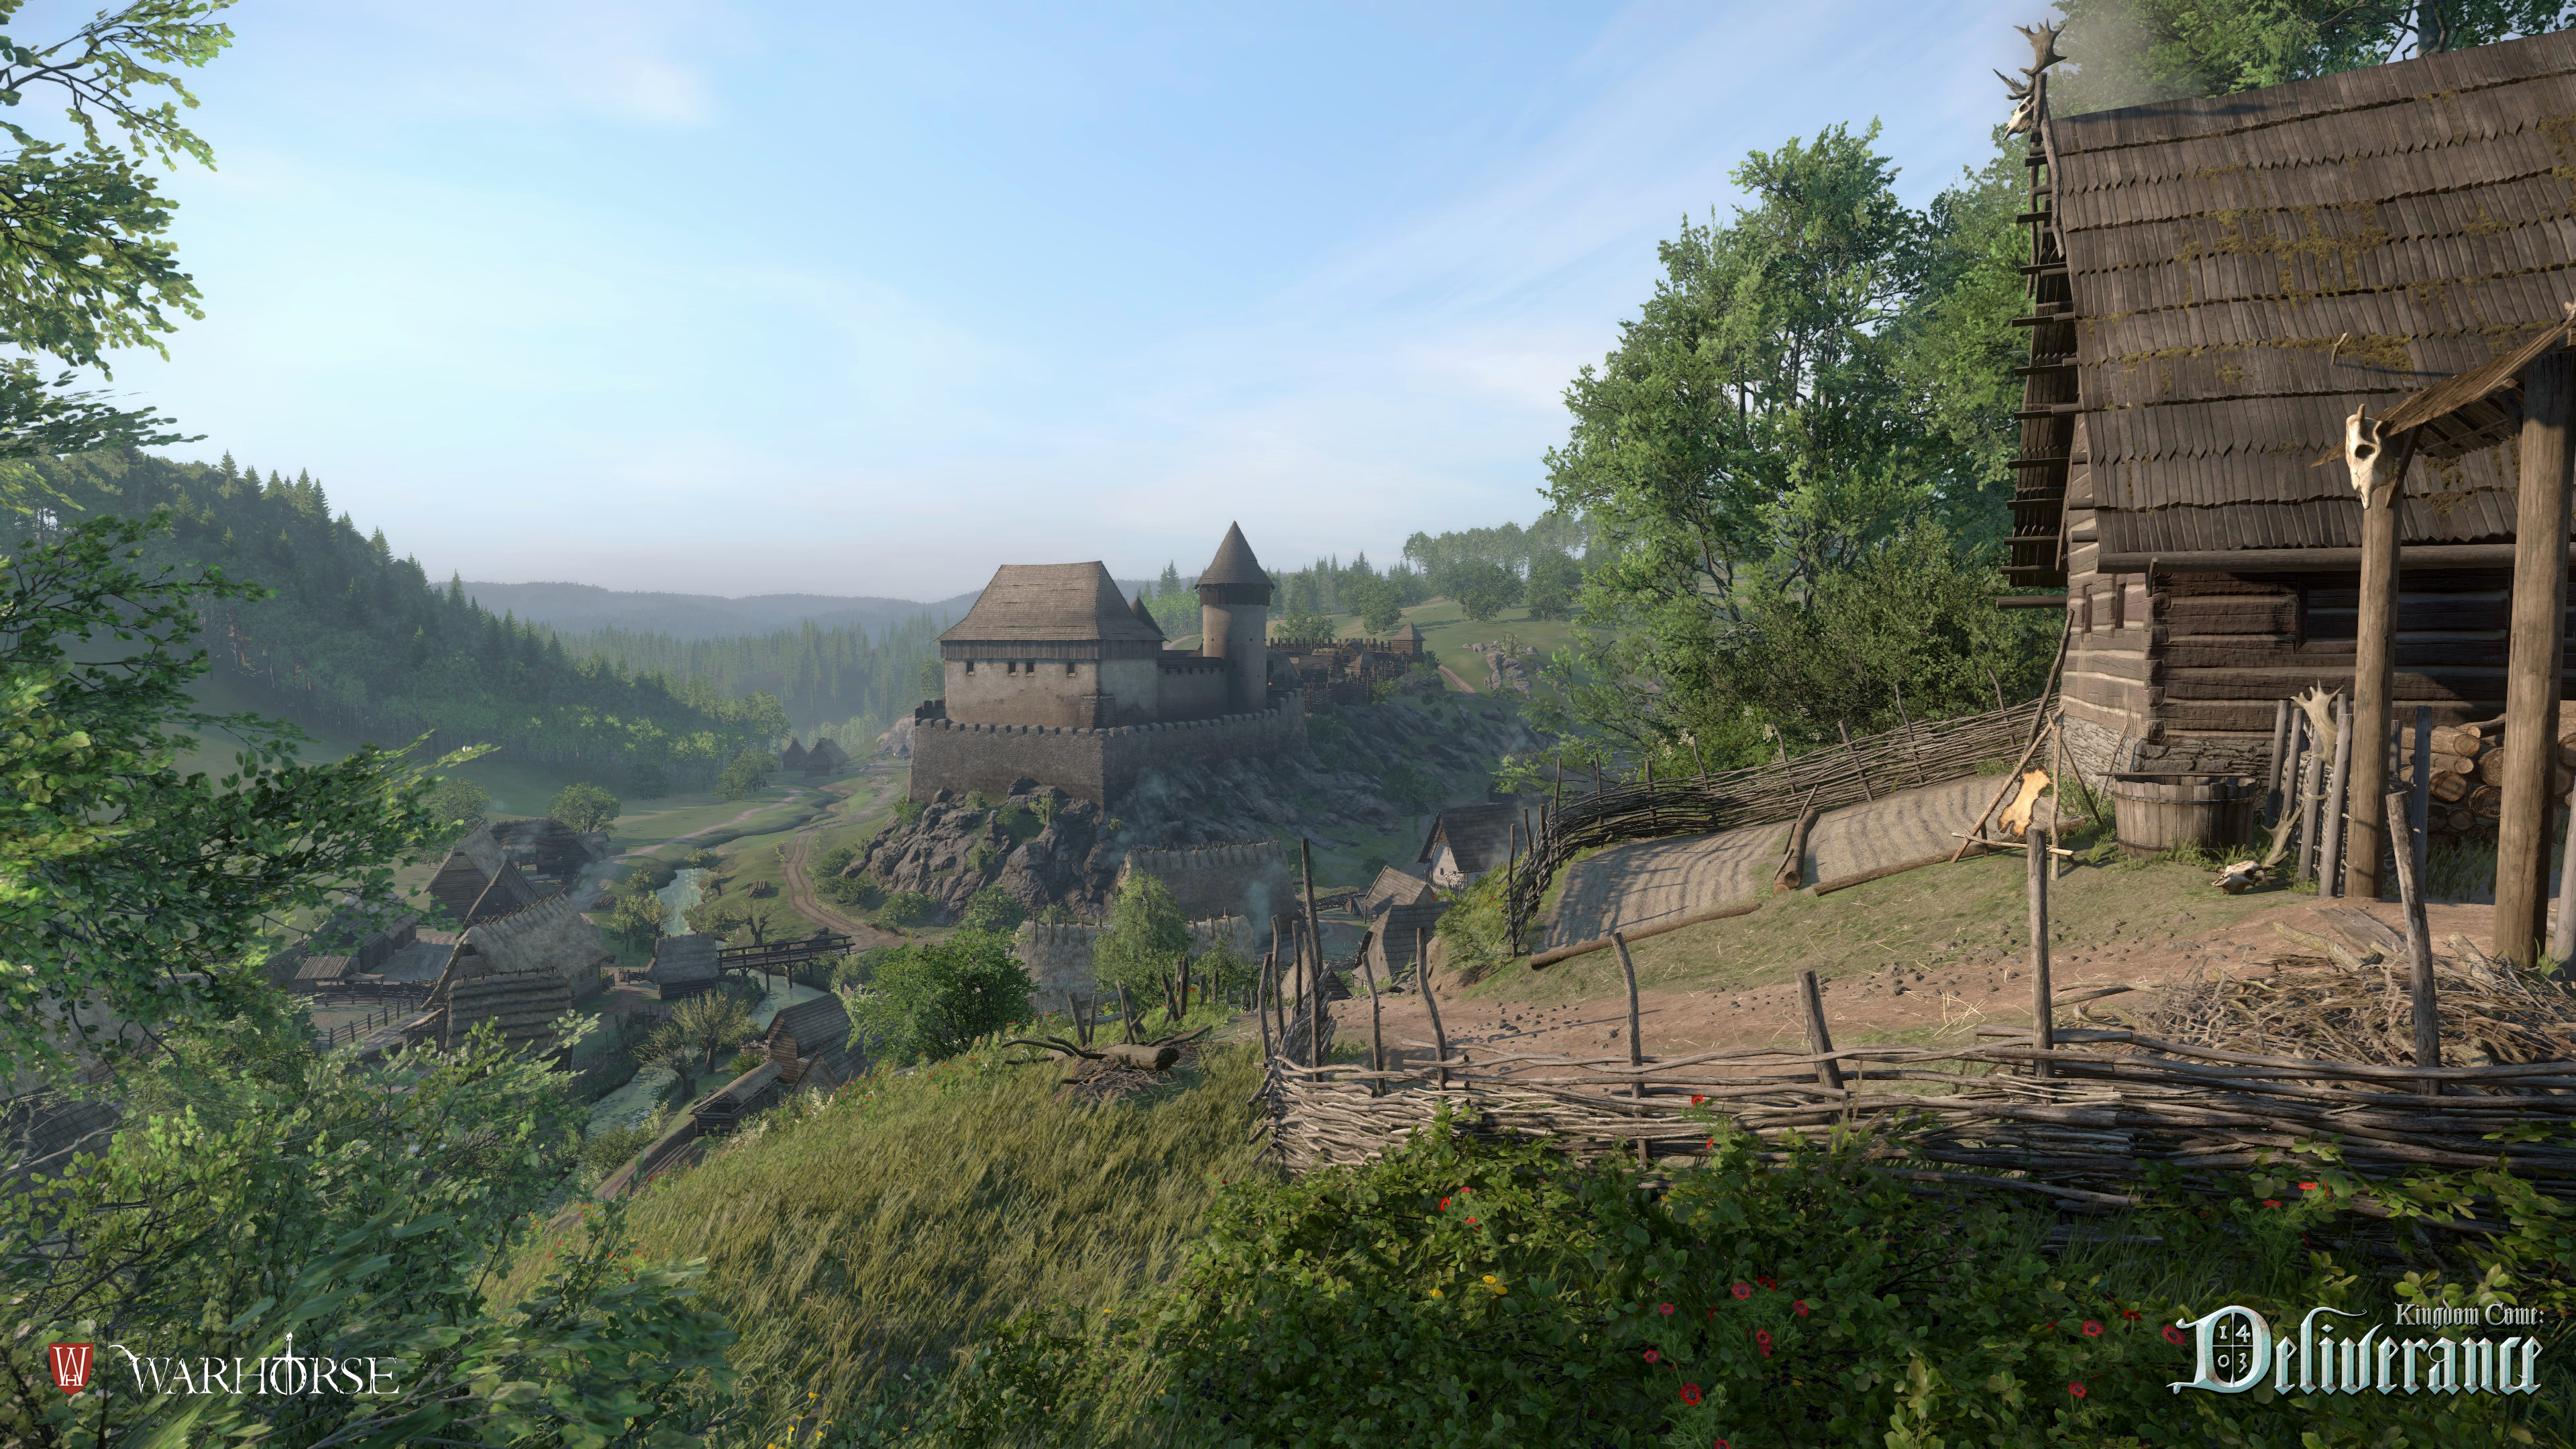 Gorgeous New Screenshots Released For No Fantasy Rpg